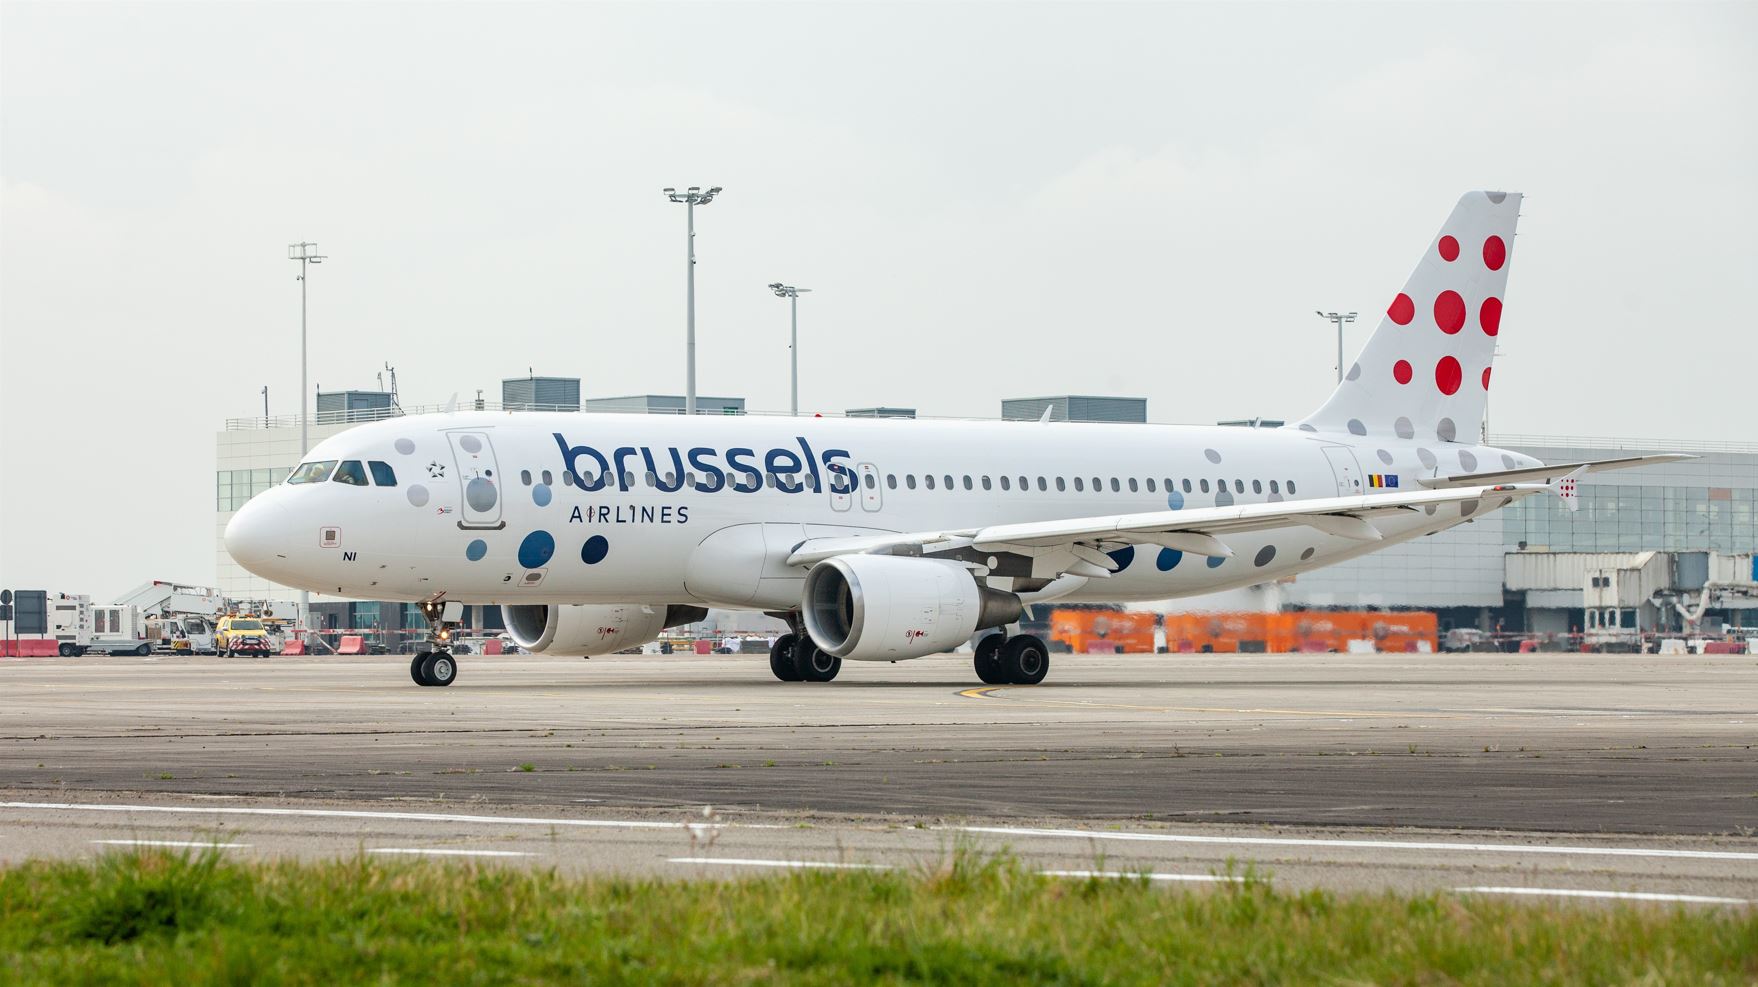 brussels airlines airplane plane